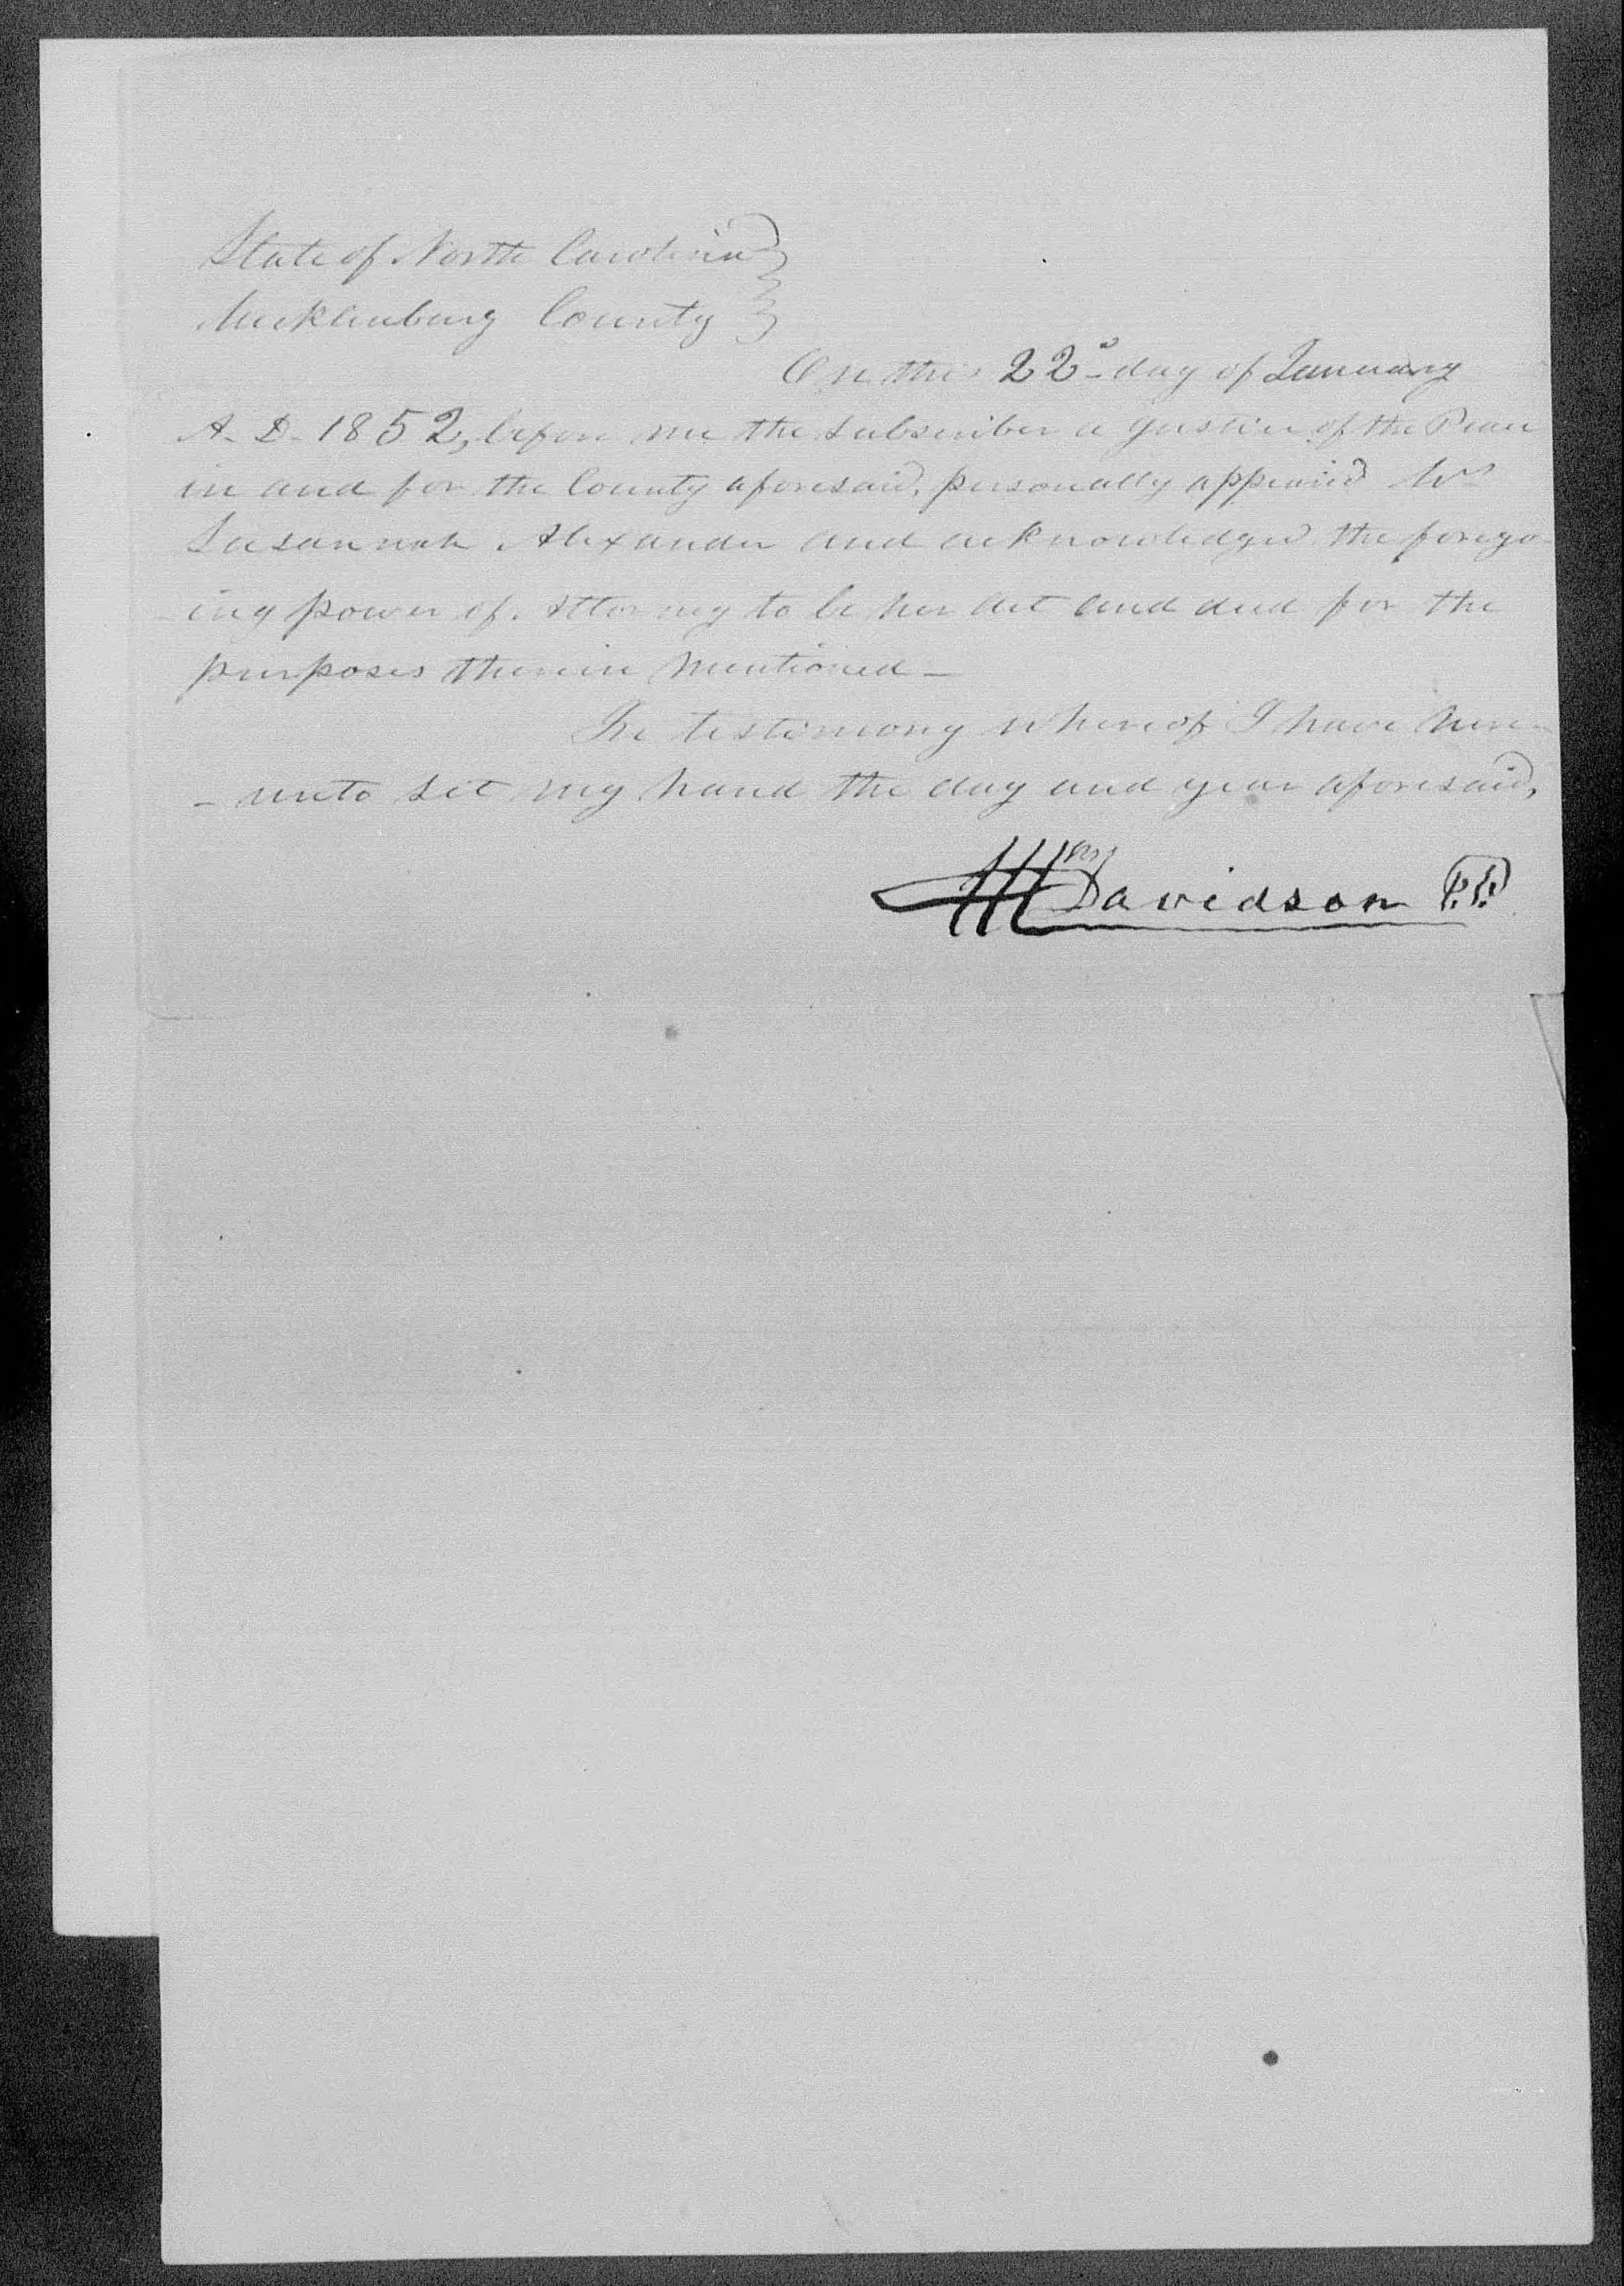 Appointment of John Y. Braynt and Suana Alexander's Power of Attorney, 22 January 1852, page 2